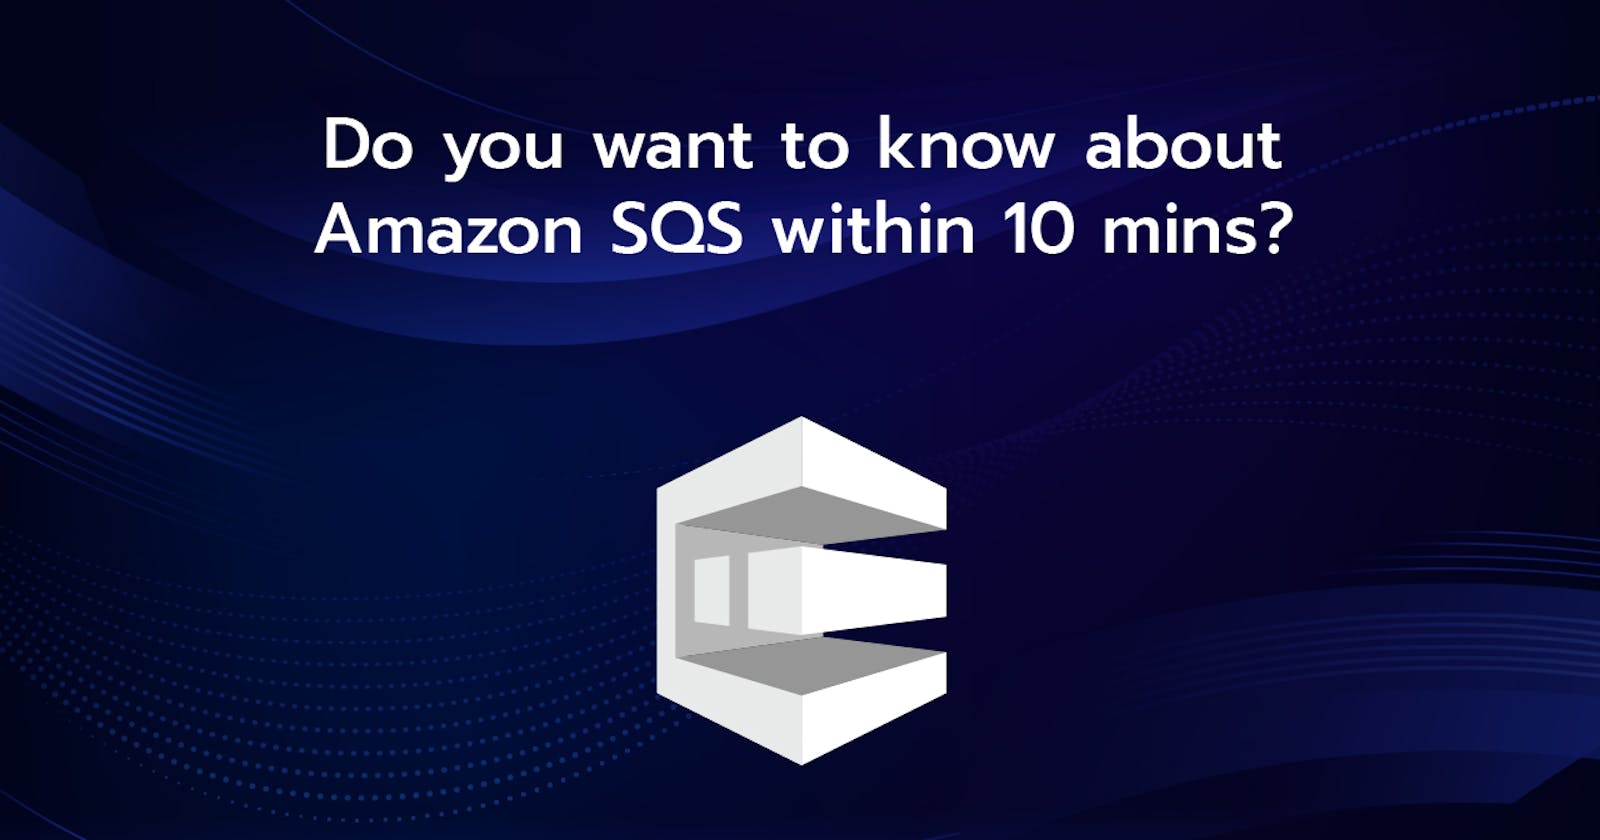 Do you want to know about Amazon SQS within 10 mins?